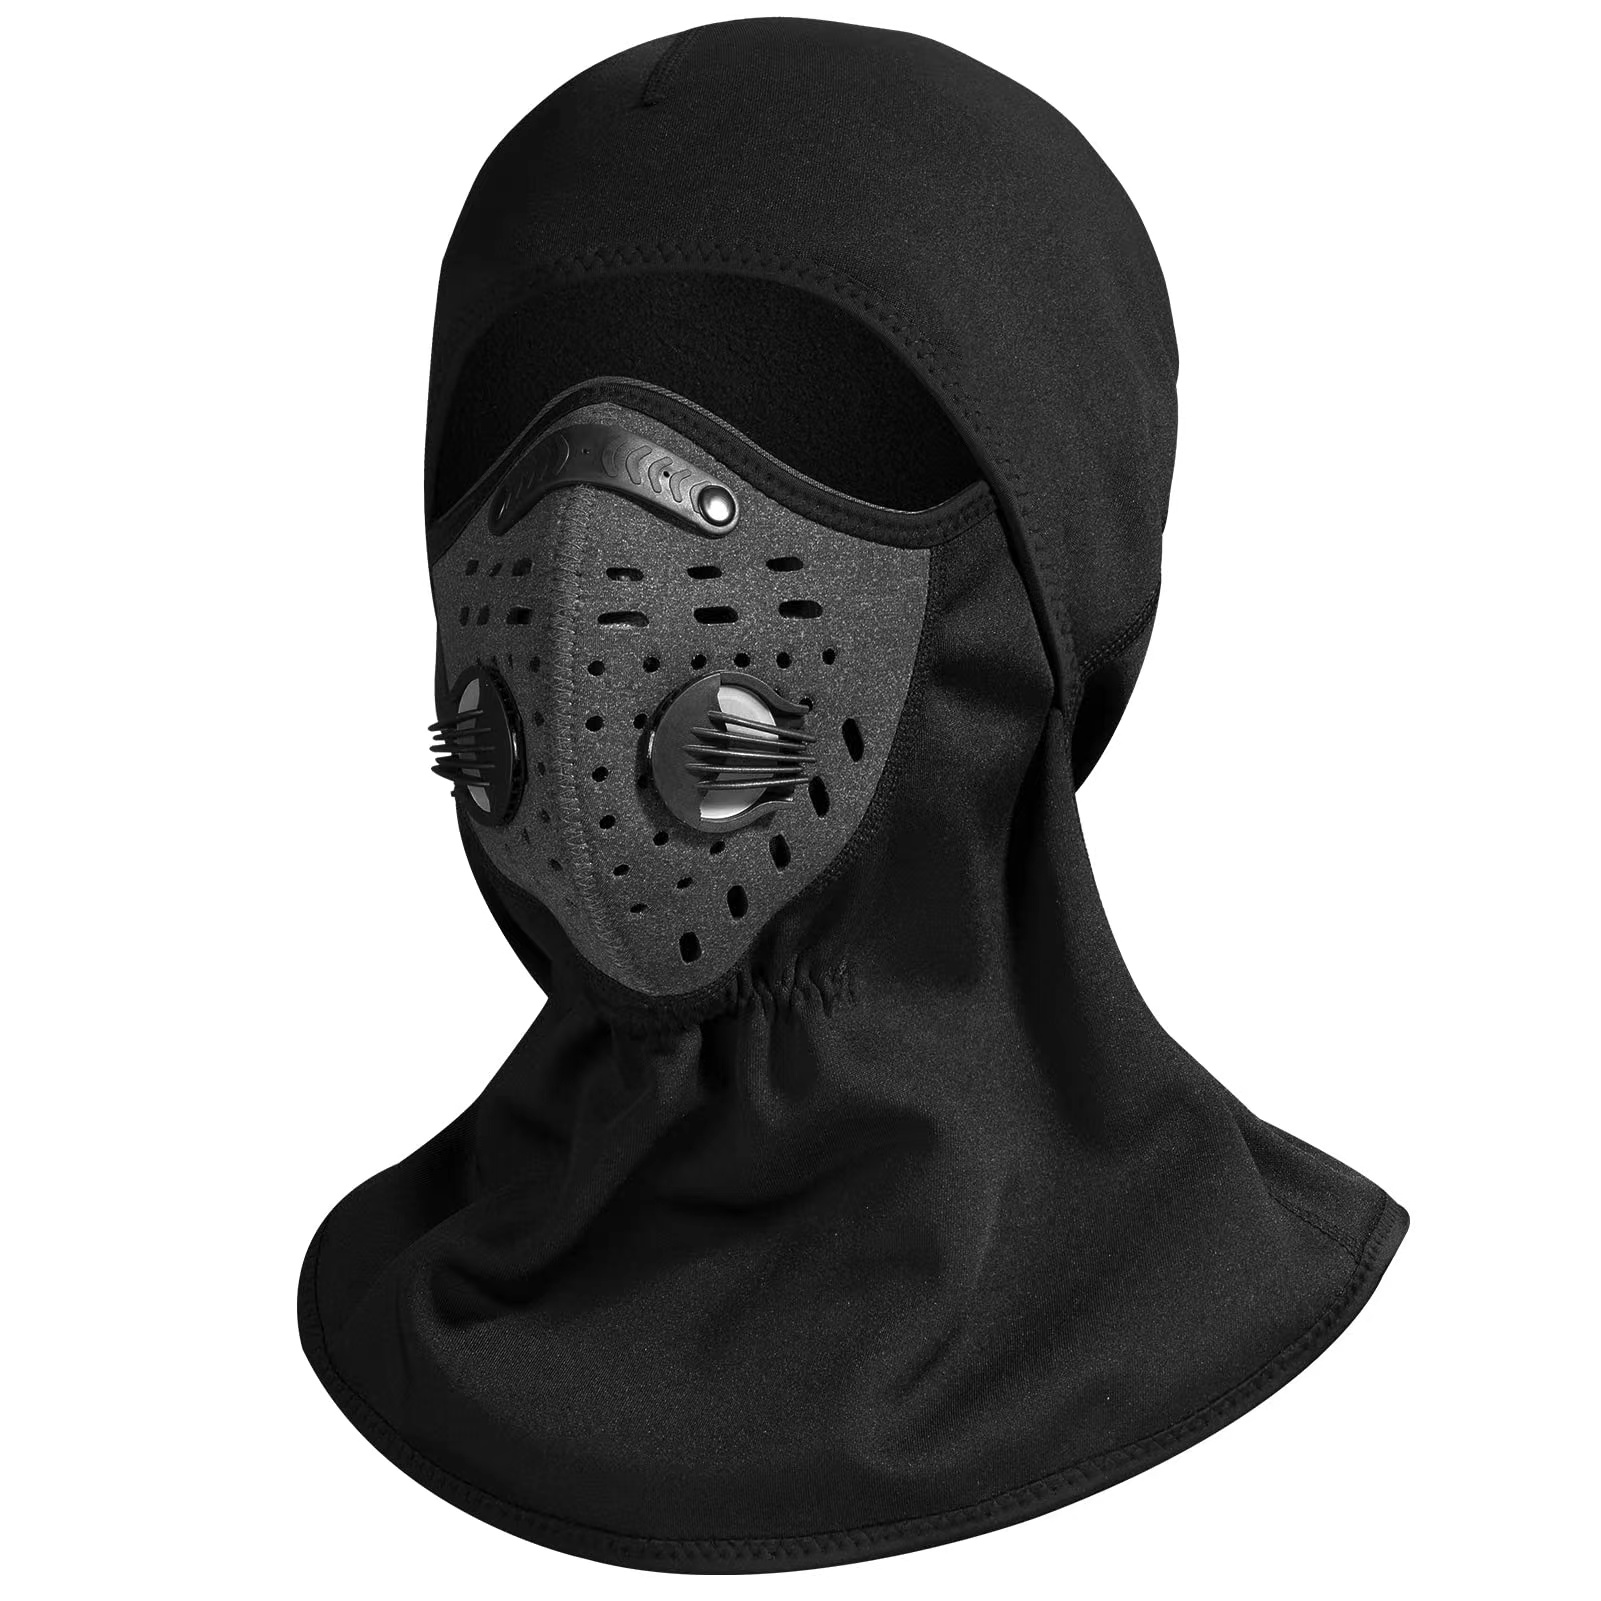 Ski Mask Balaclava Winter Mask for Men Baclava Cold Weather Thermal